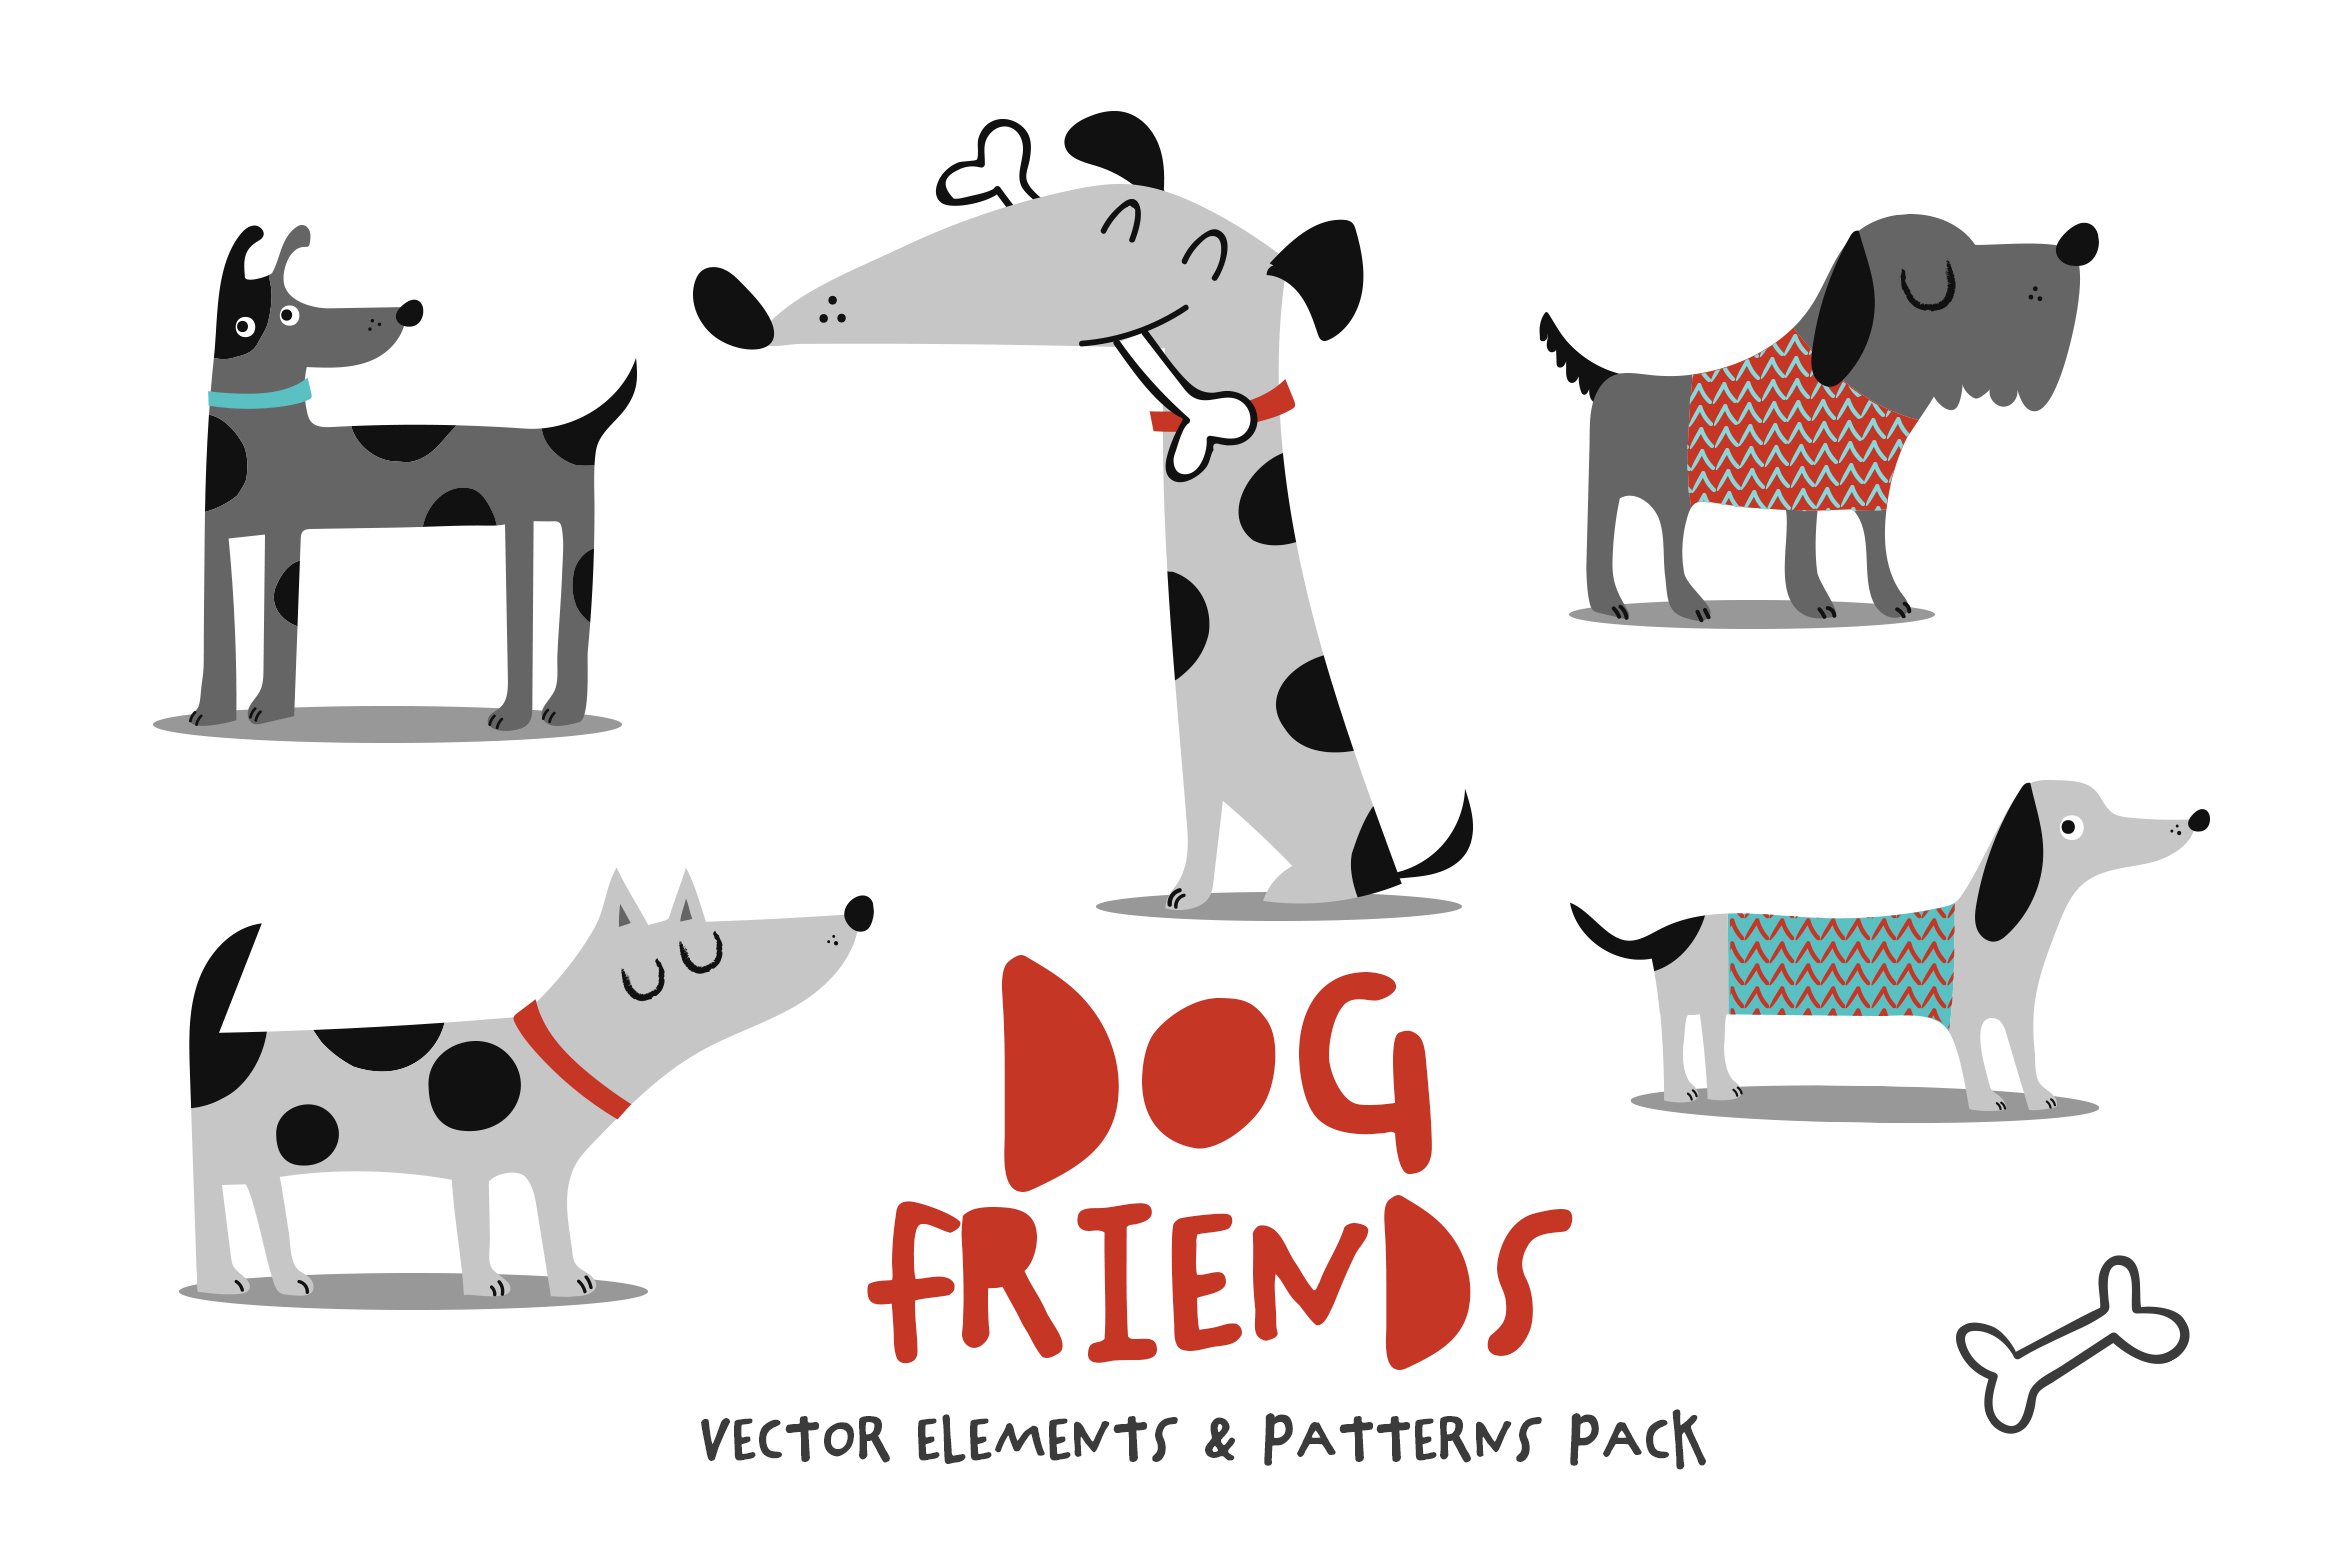 dogs friends pack 1 28234029 870